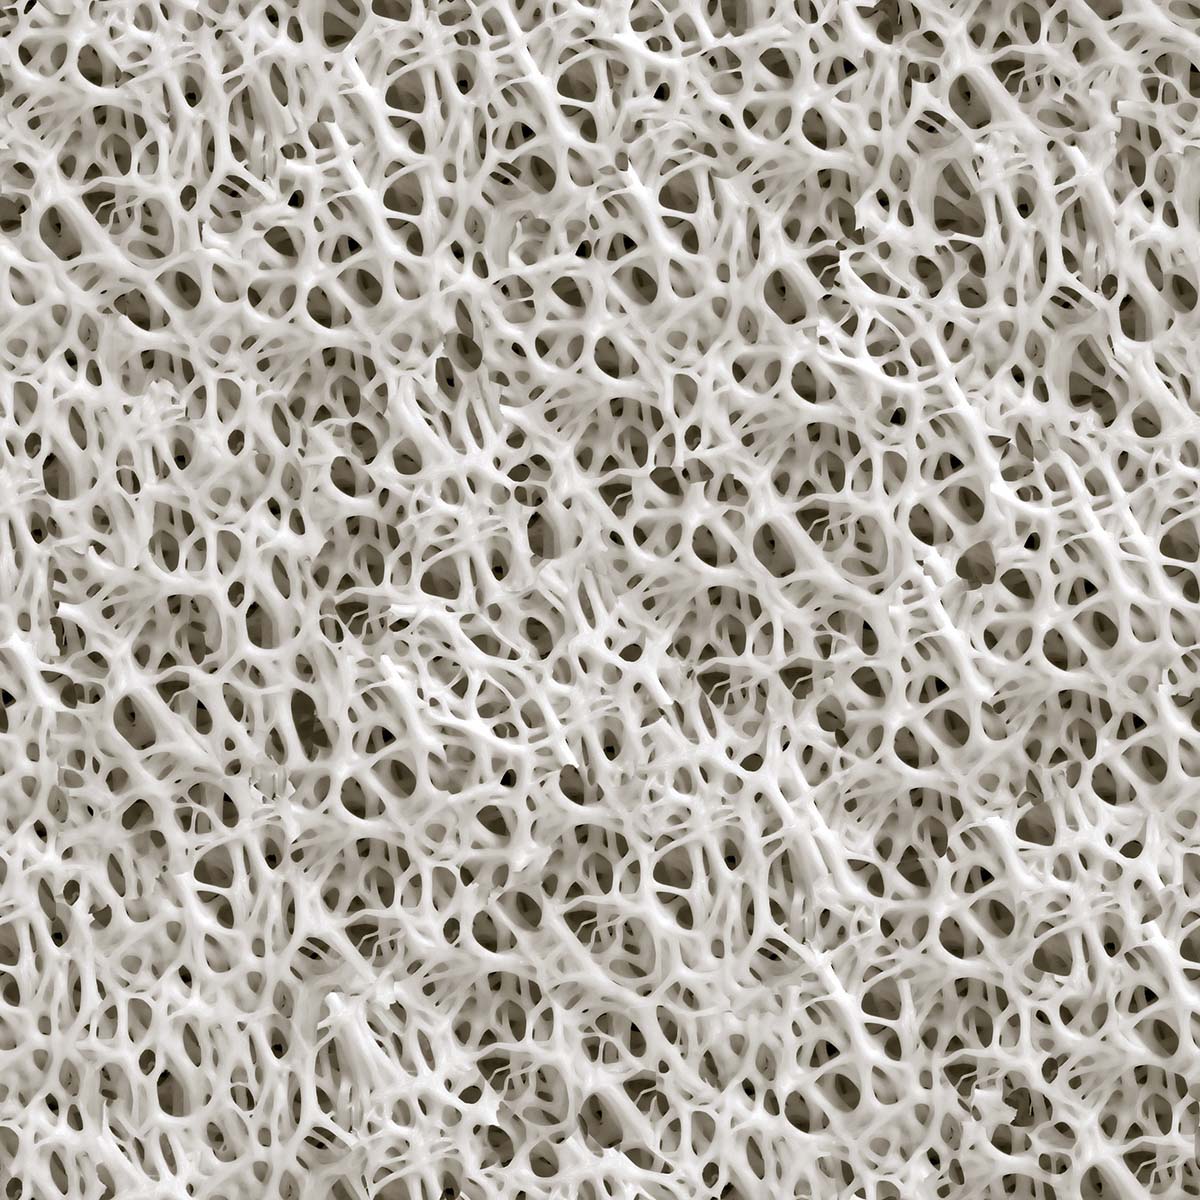 A close up of a white texture